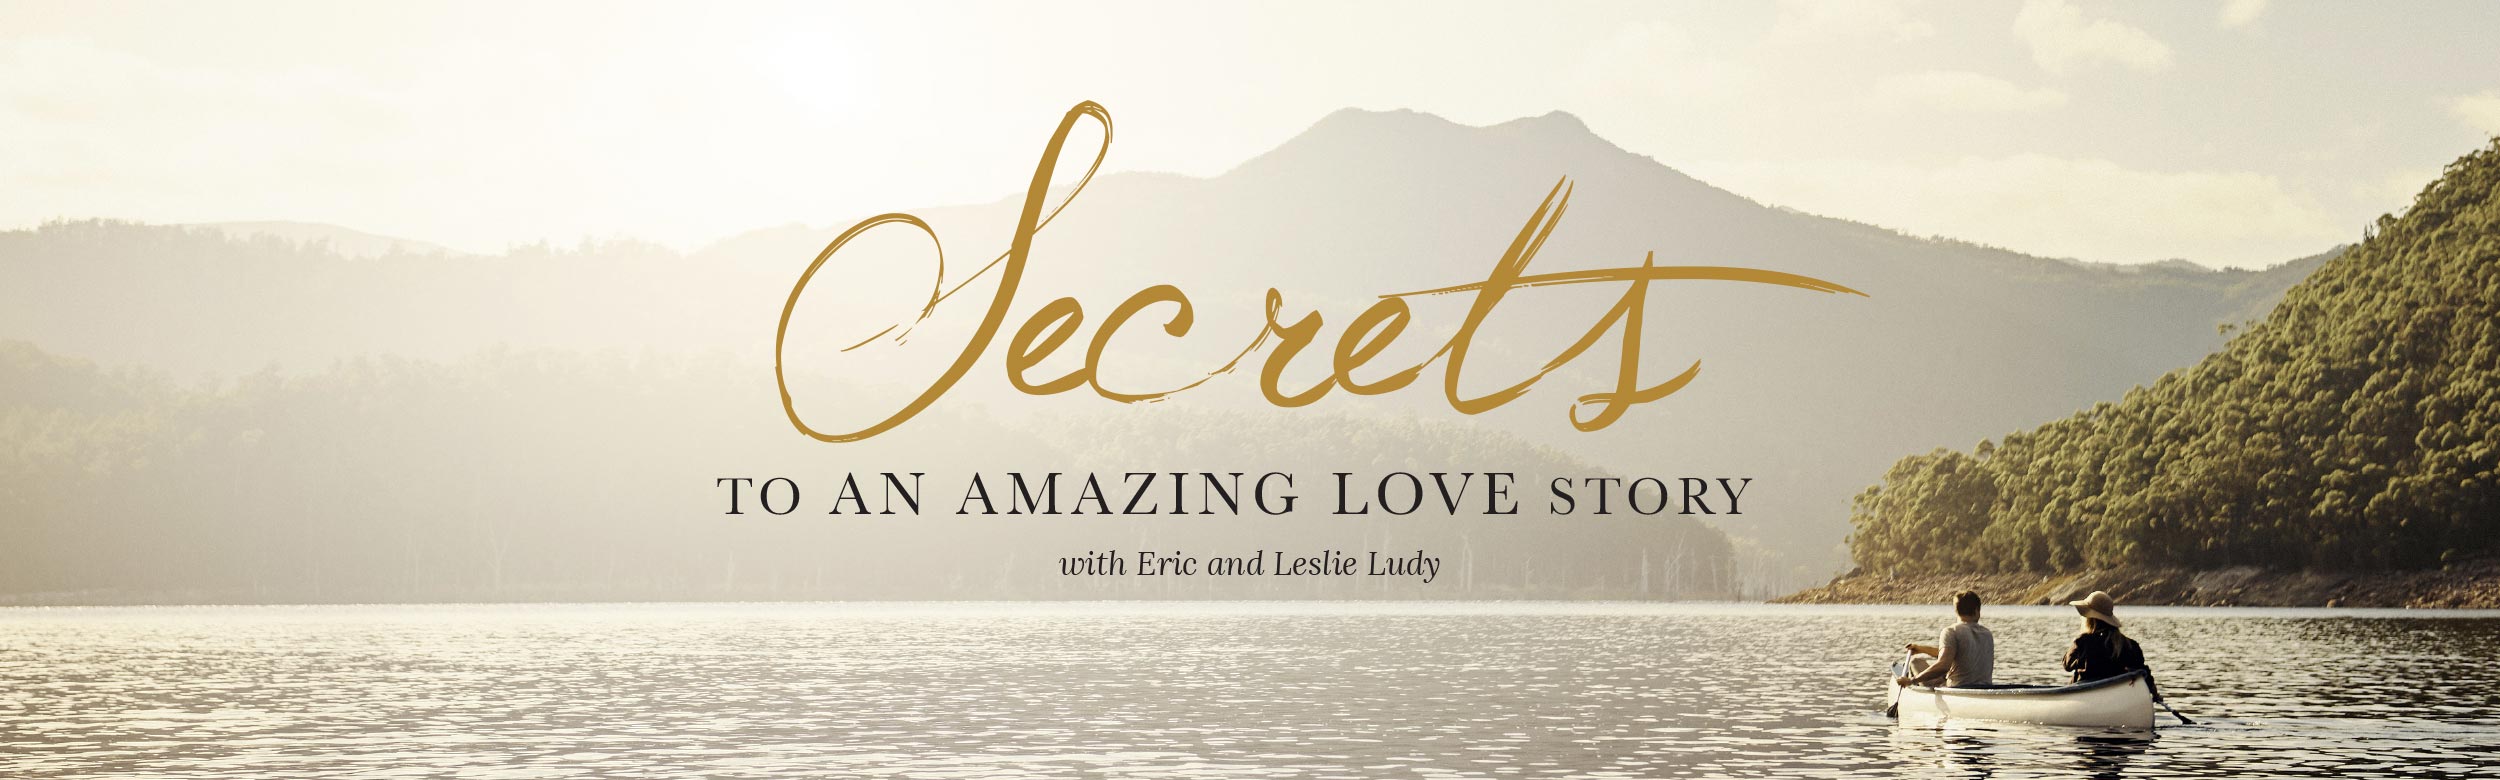 Secrets to an Amazing Love Story - Bravehearted Christian